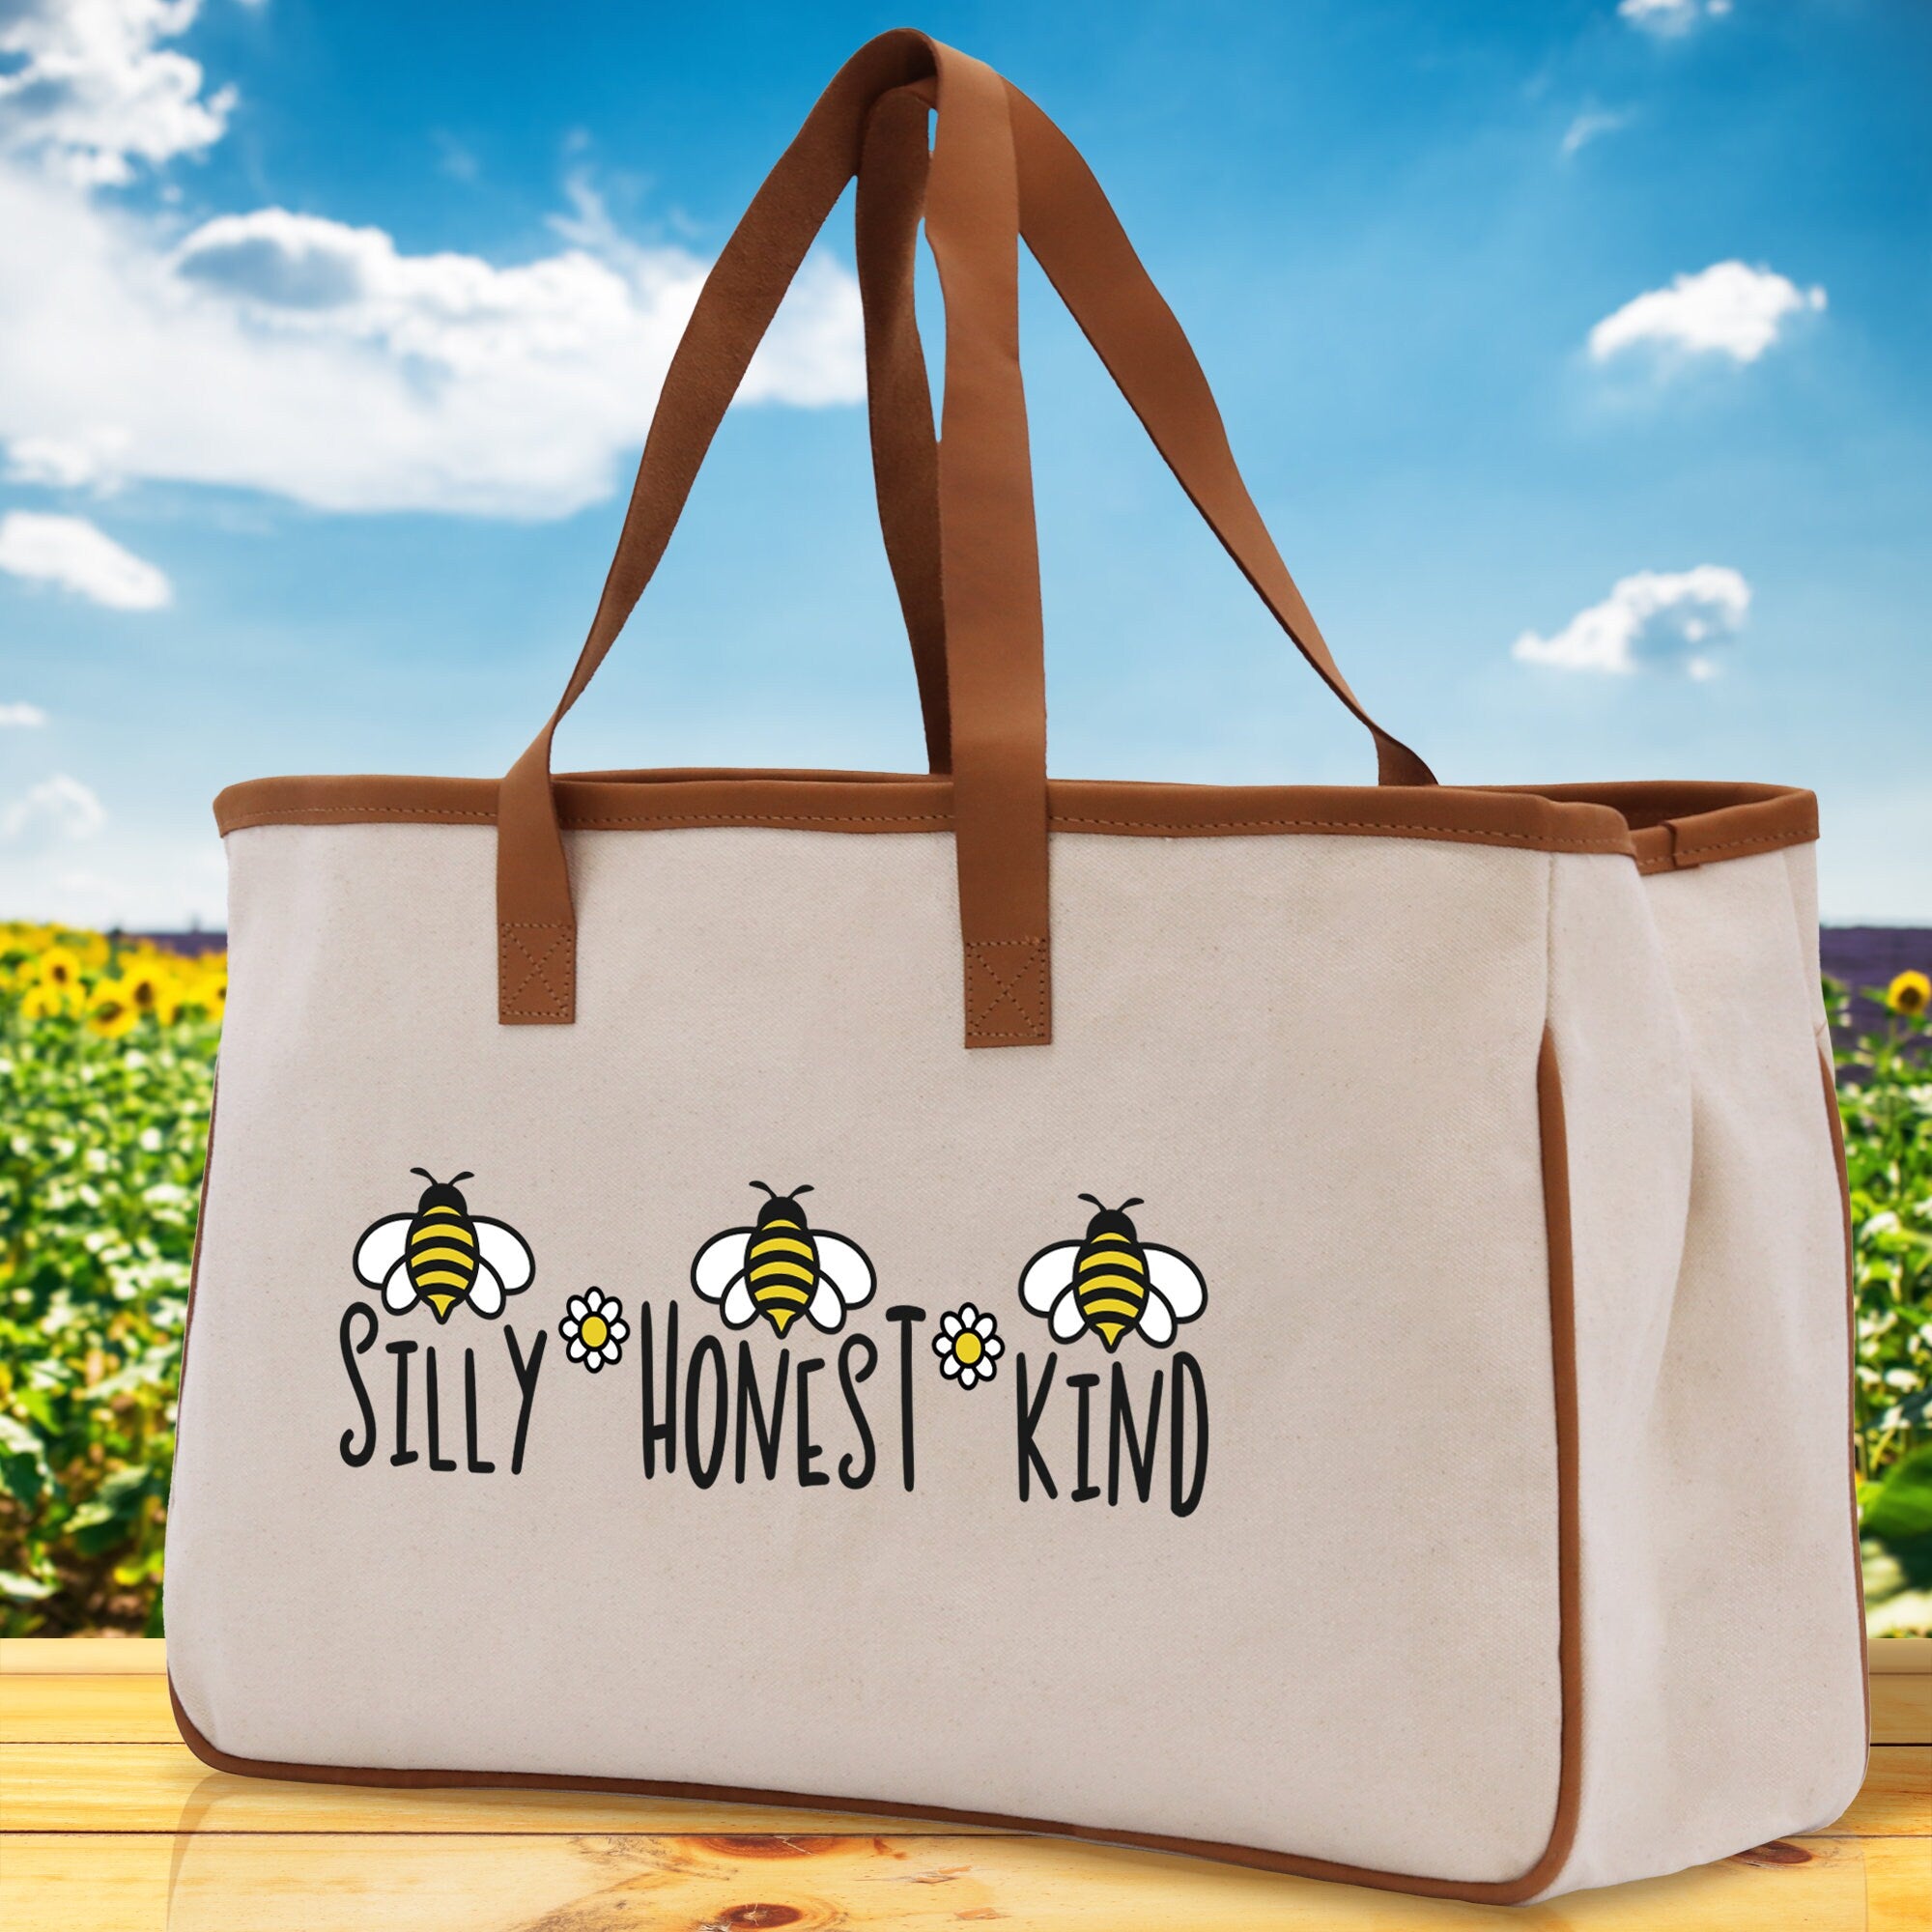 Silly Honest KindCotton Canvas Tote Bag Nurse Appreciation Gift Bag Gift for Her Birthday Gift Bee Kind Mental Health Matters Save The Bees